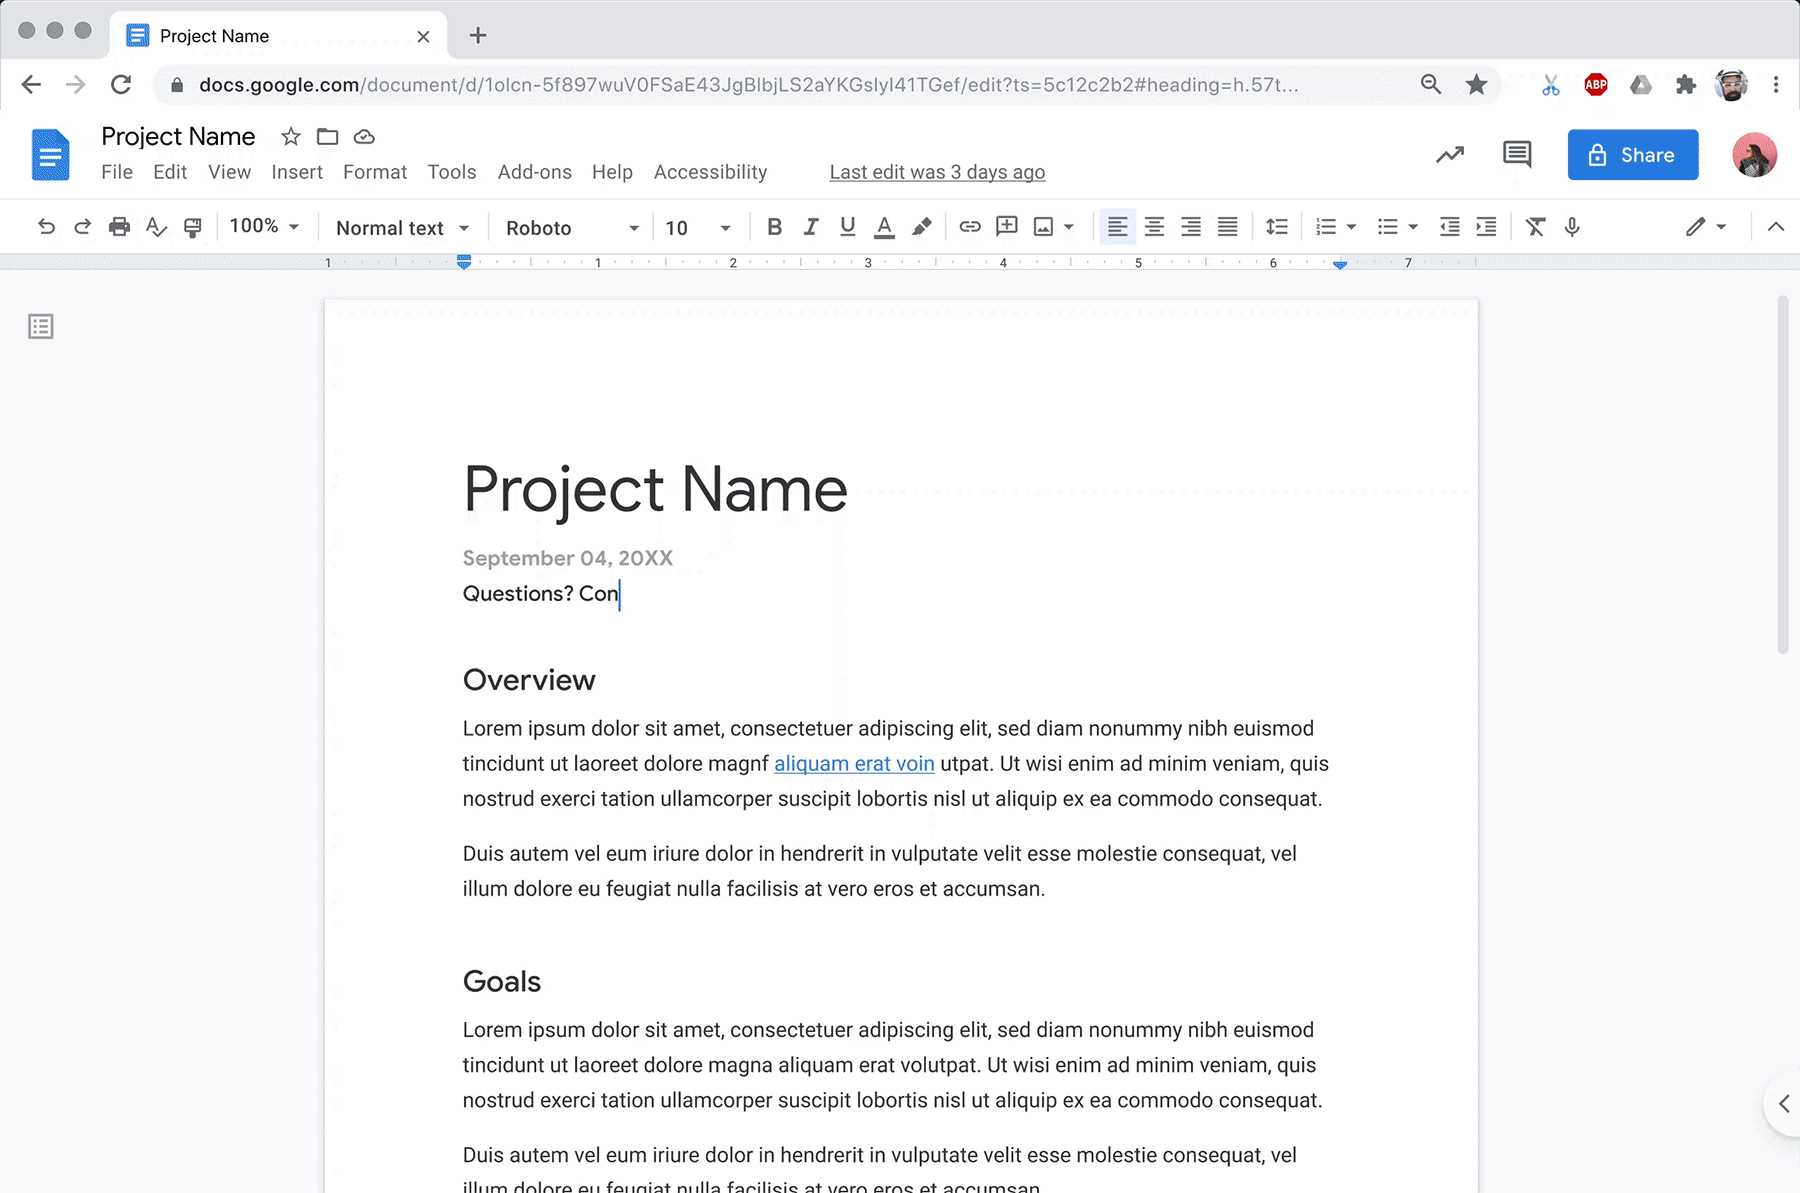 Google Docs lets you mention user within the document